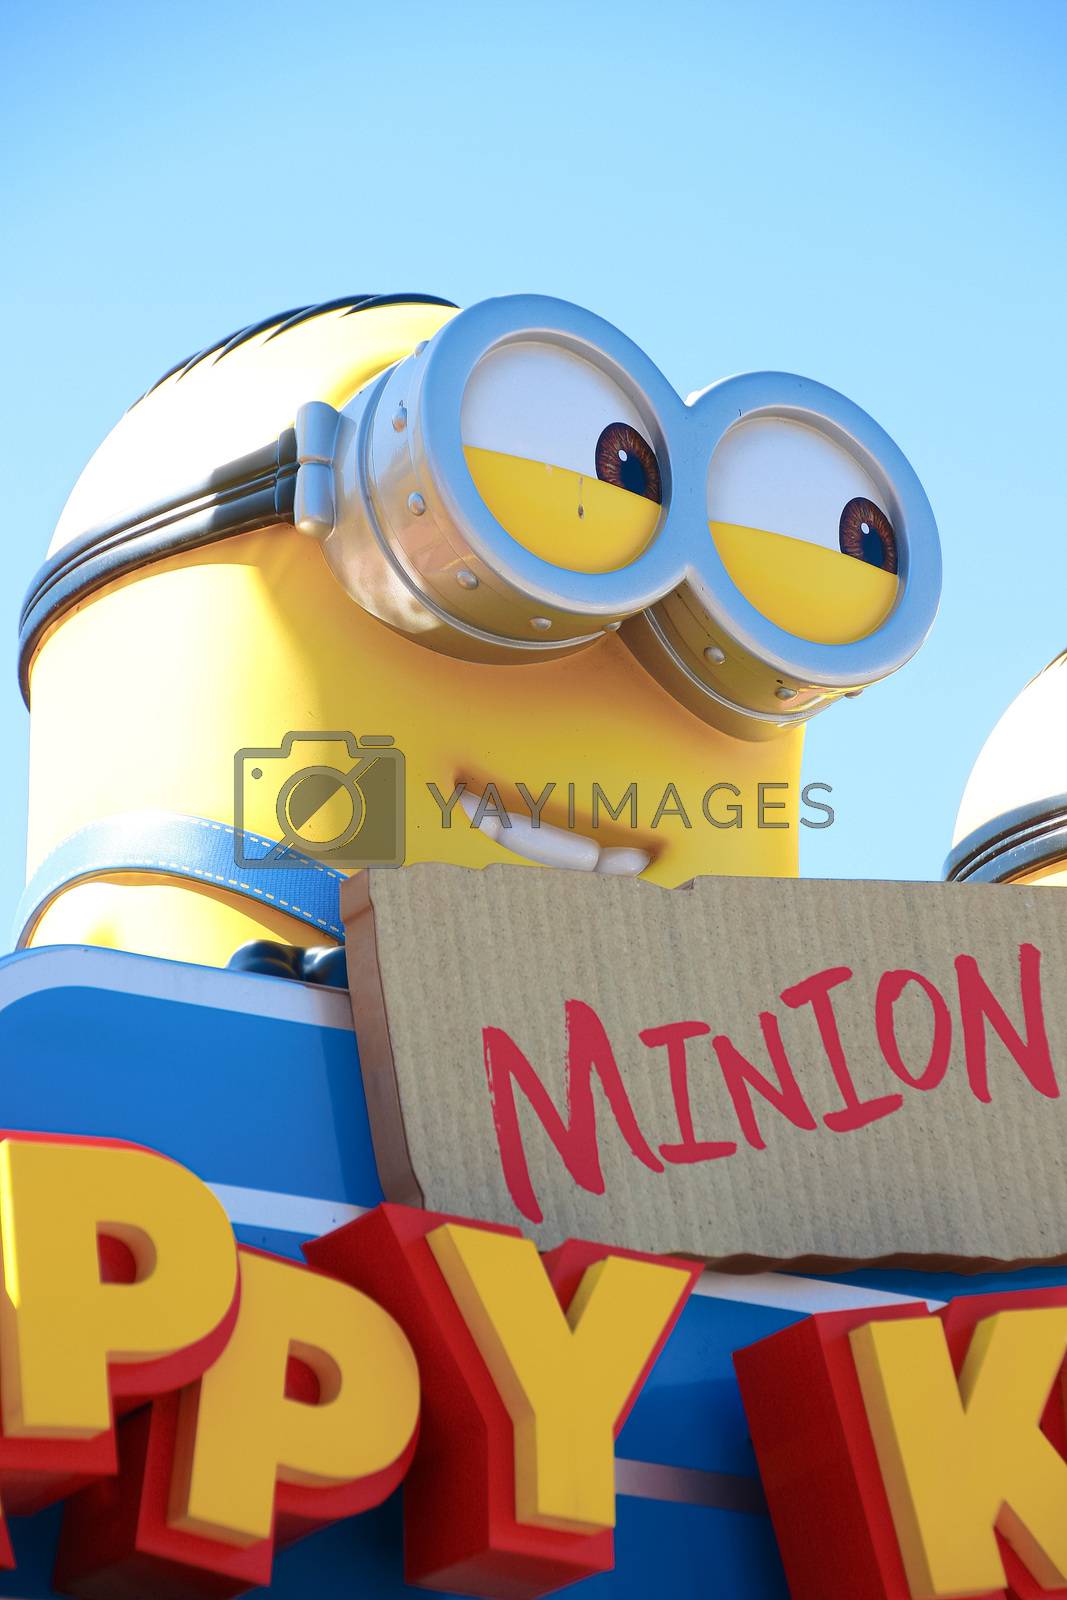 Royalty free image of OSAKA, JAPAN - Feb 19, 2020 : Statue of "HAPPY MINION", located in Universal Studios Japan, Osaka, Japan. Minions are famous character from Despicable Me animation. by USA-TARO